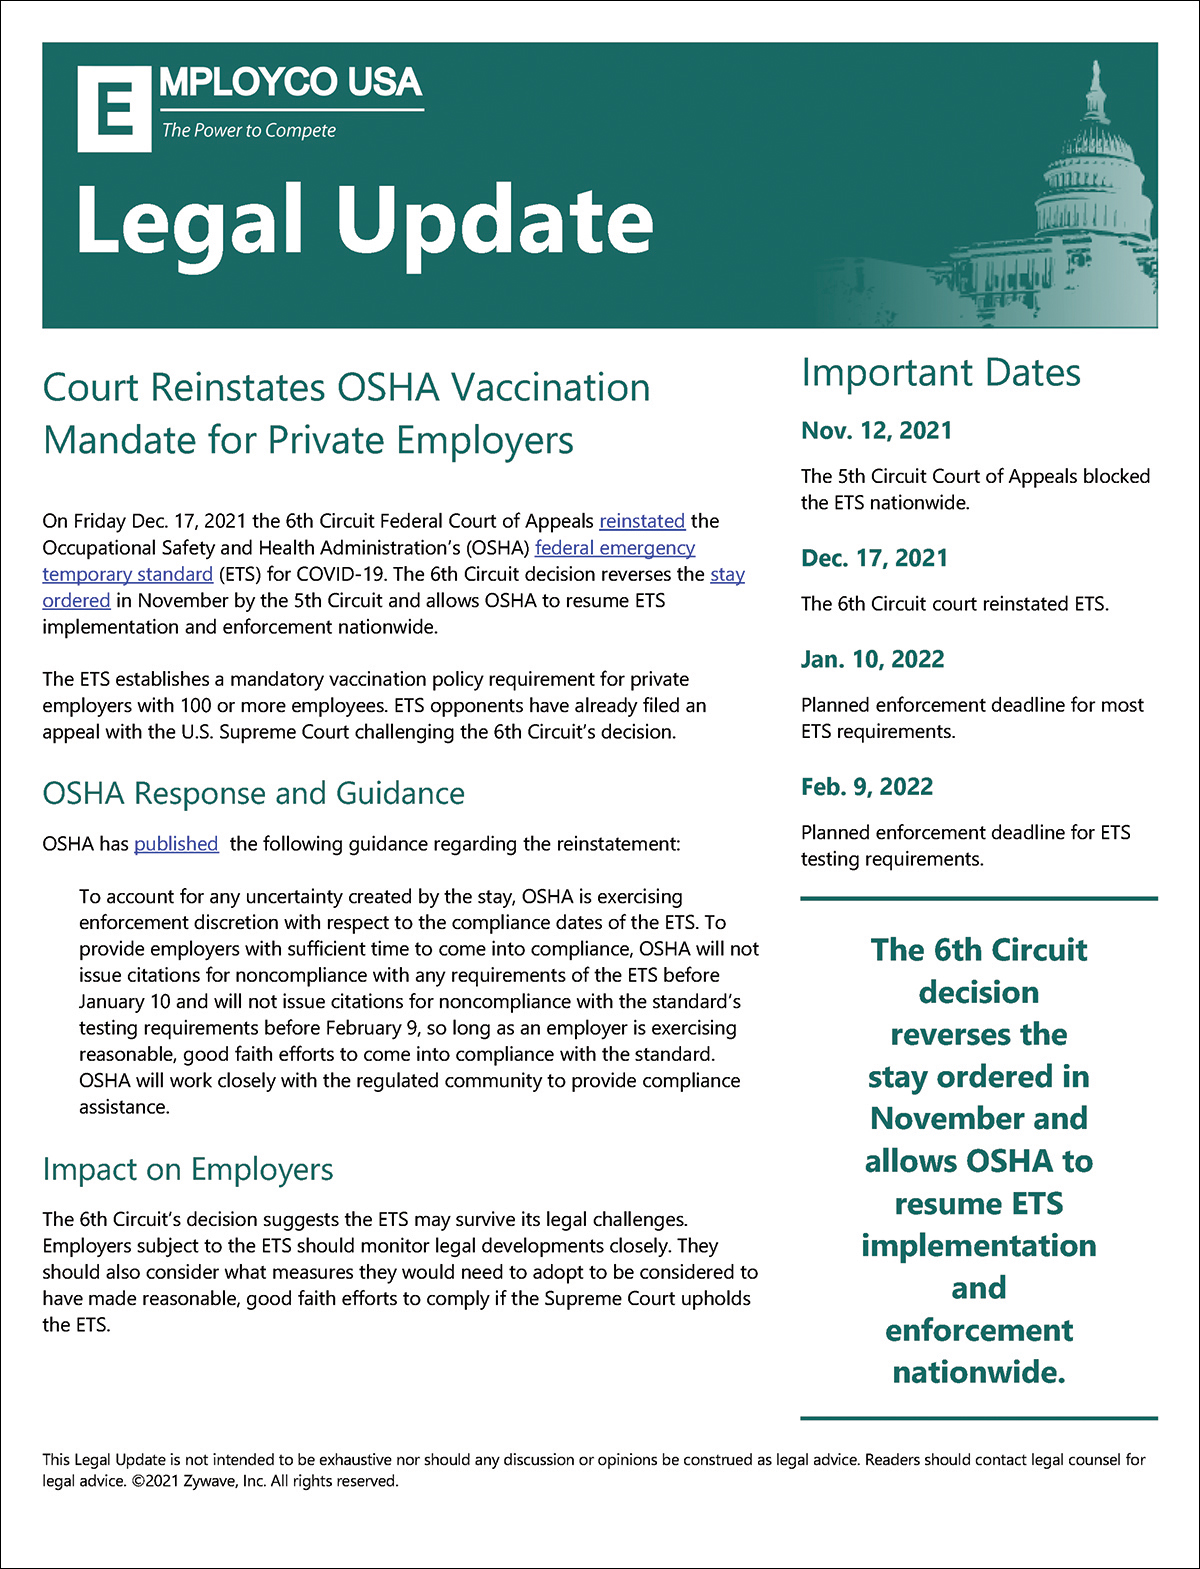 Court Reinstates OSHA Vaccination Mandate for Private Employers